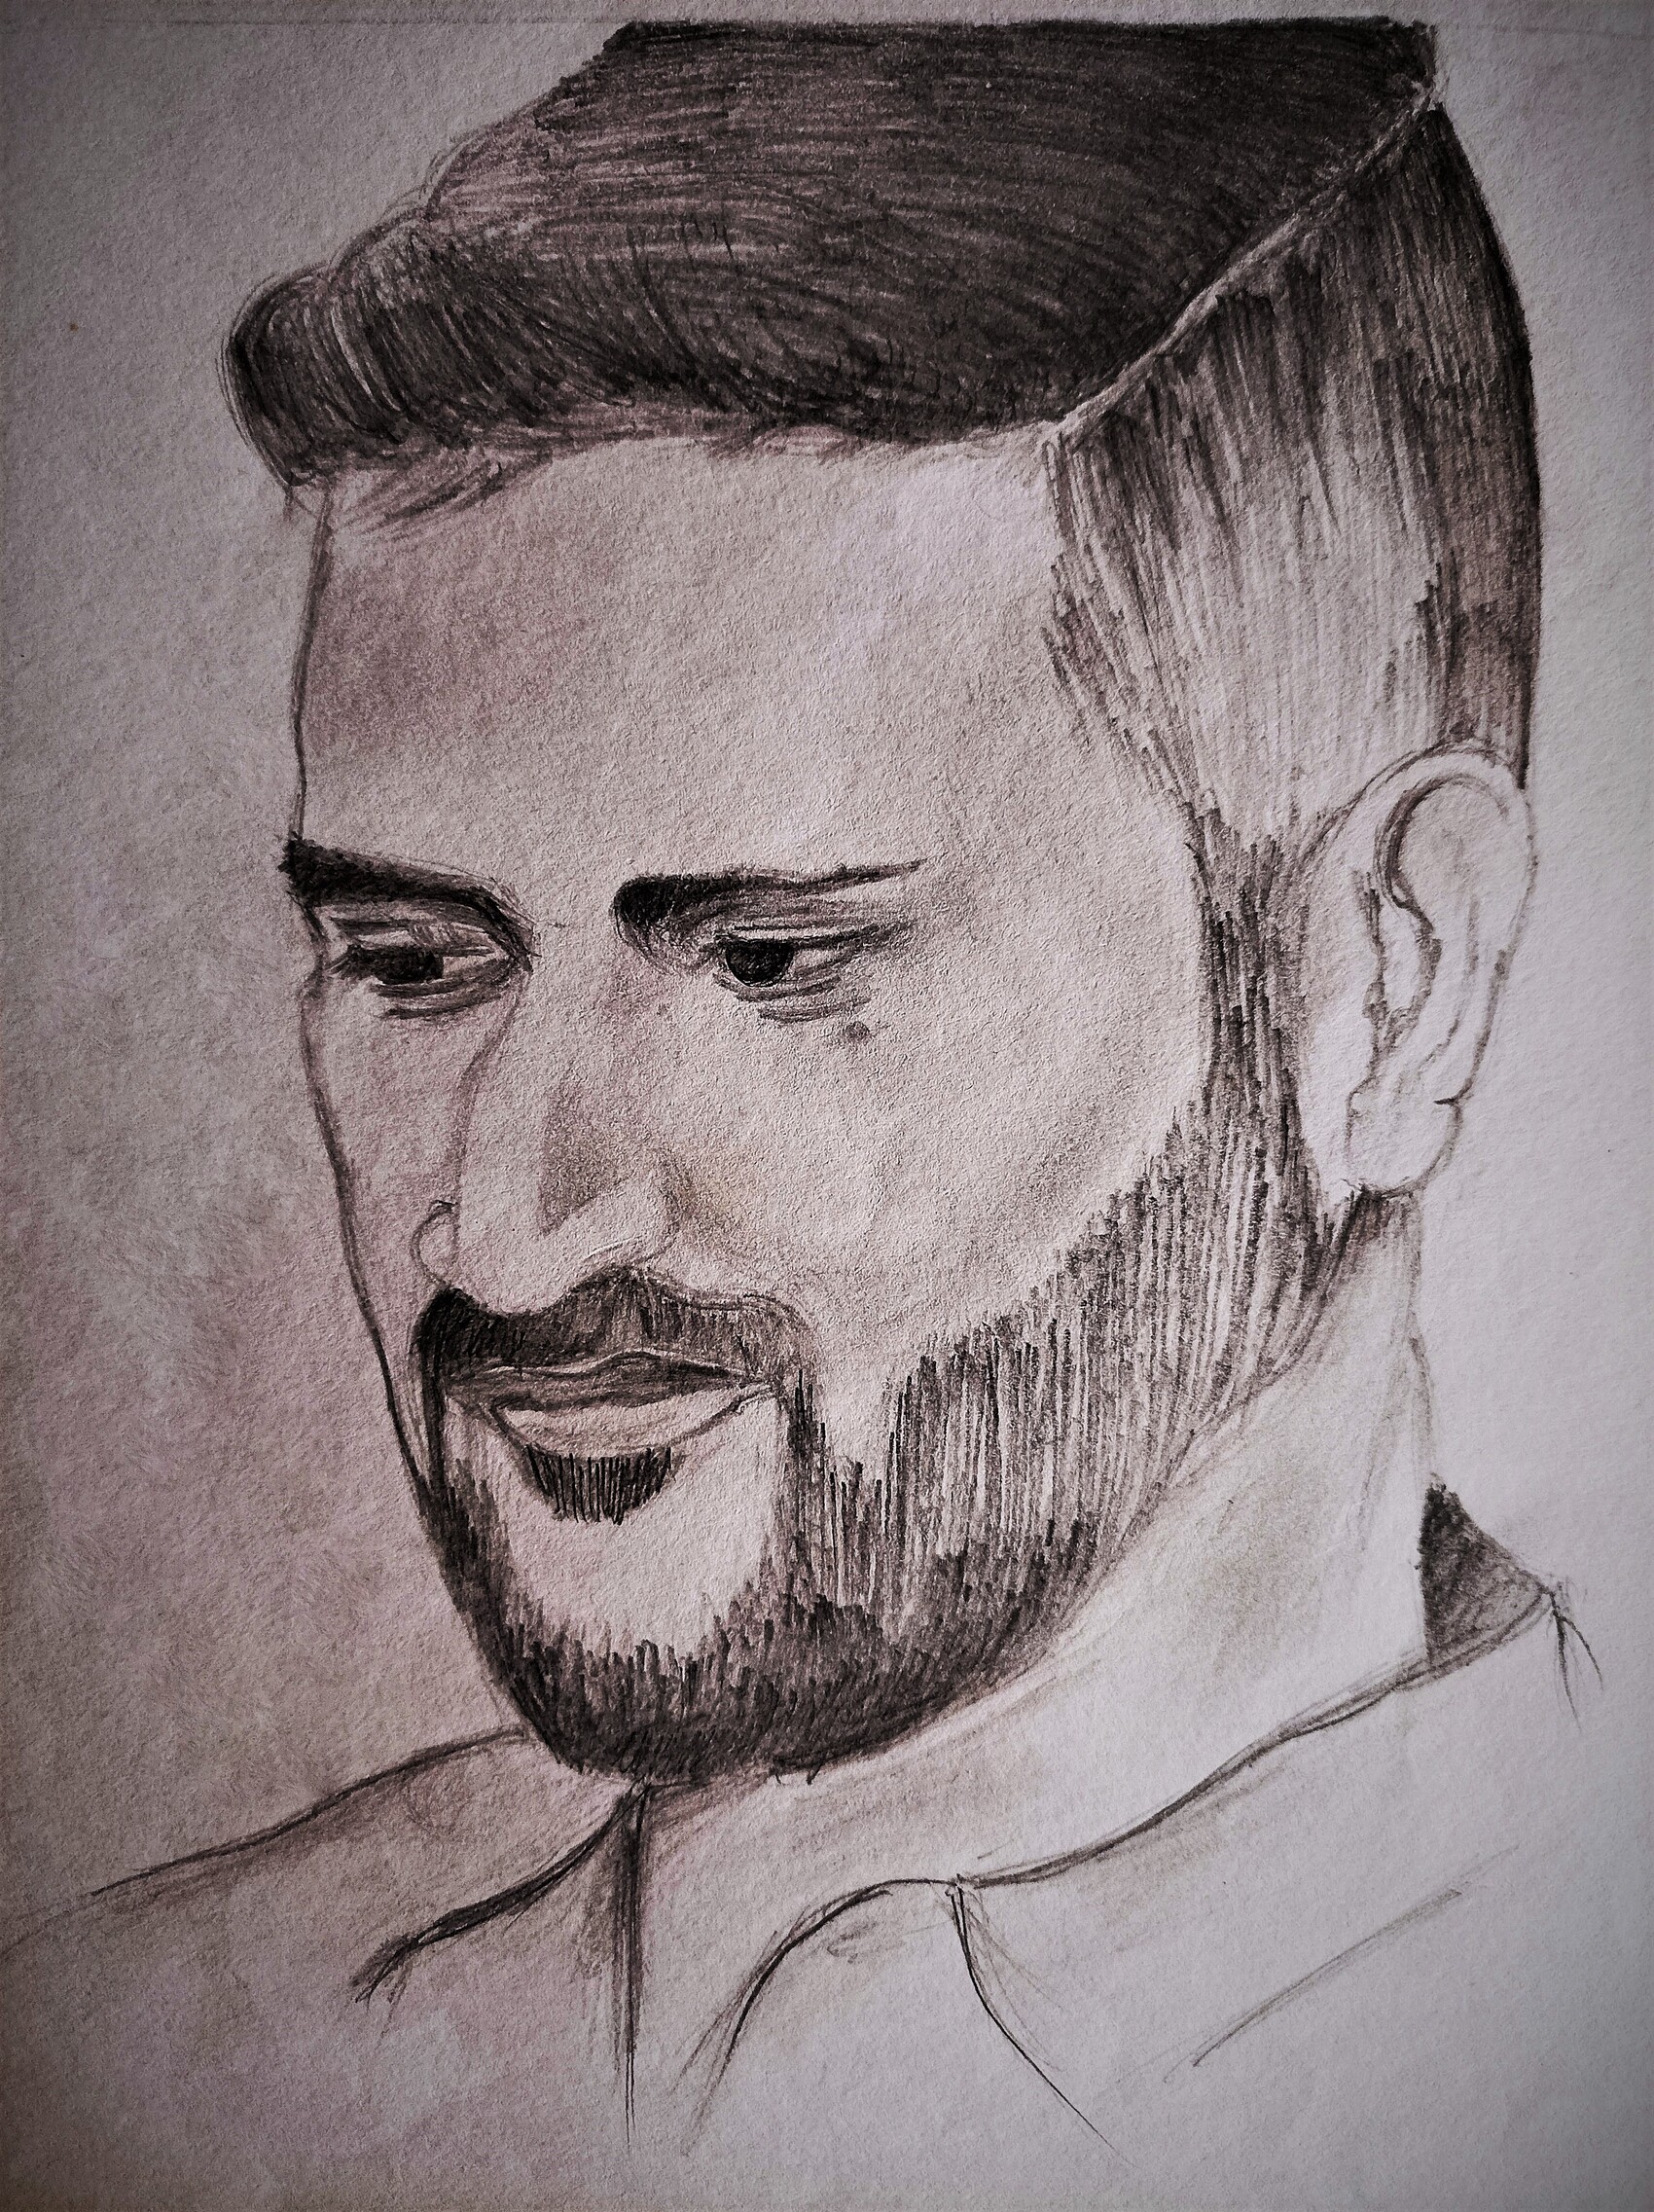 Easy Pencil Drawing of cricketer MS Dhoni.